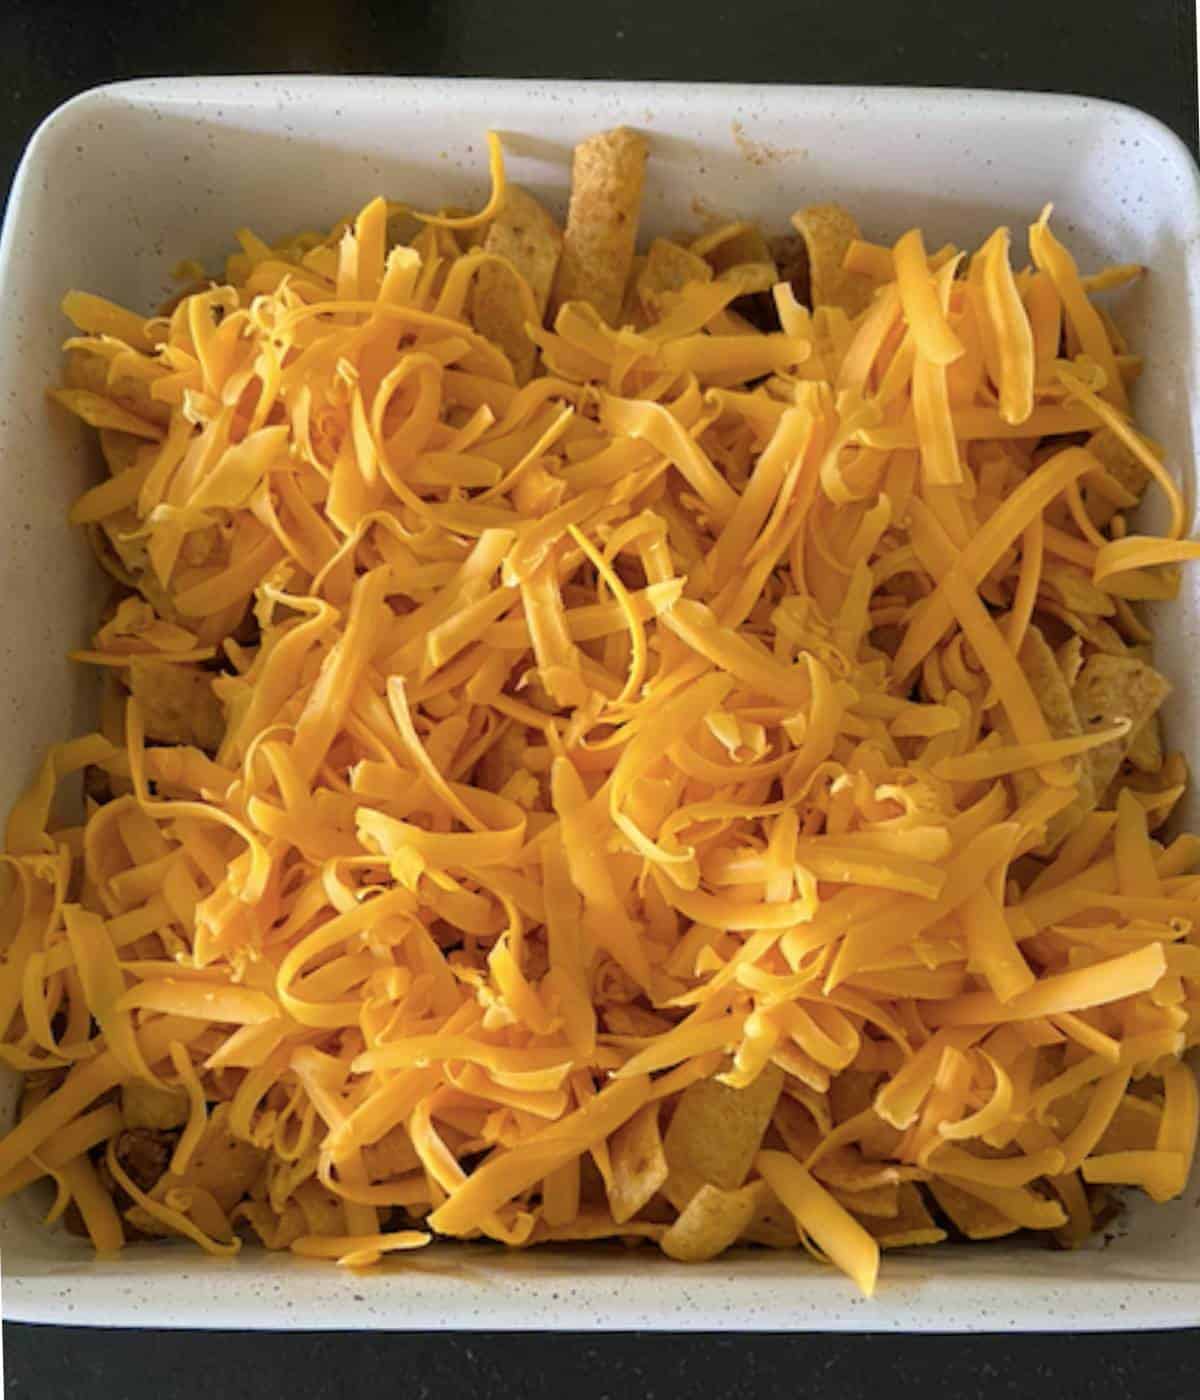 Frito pie topped with cheese.